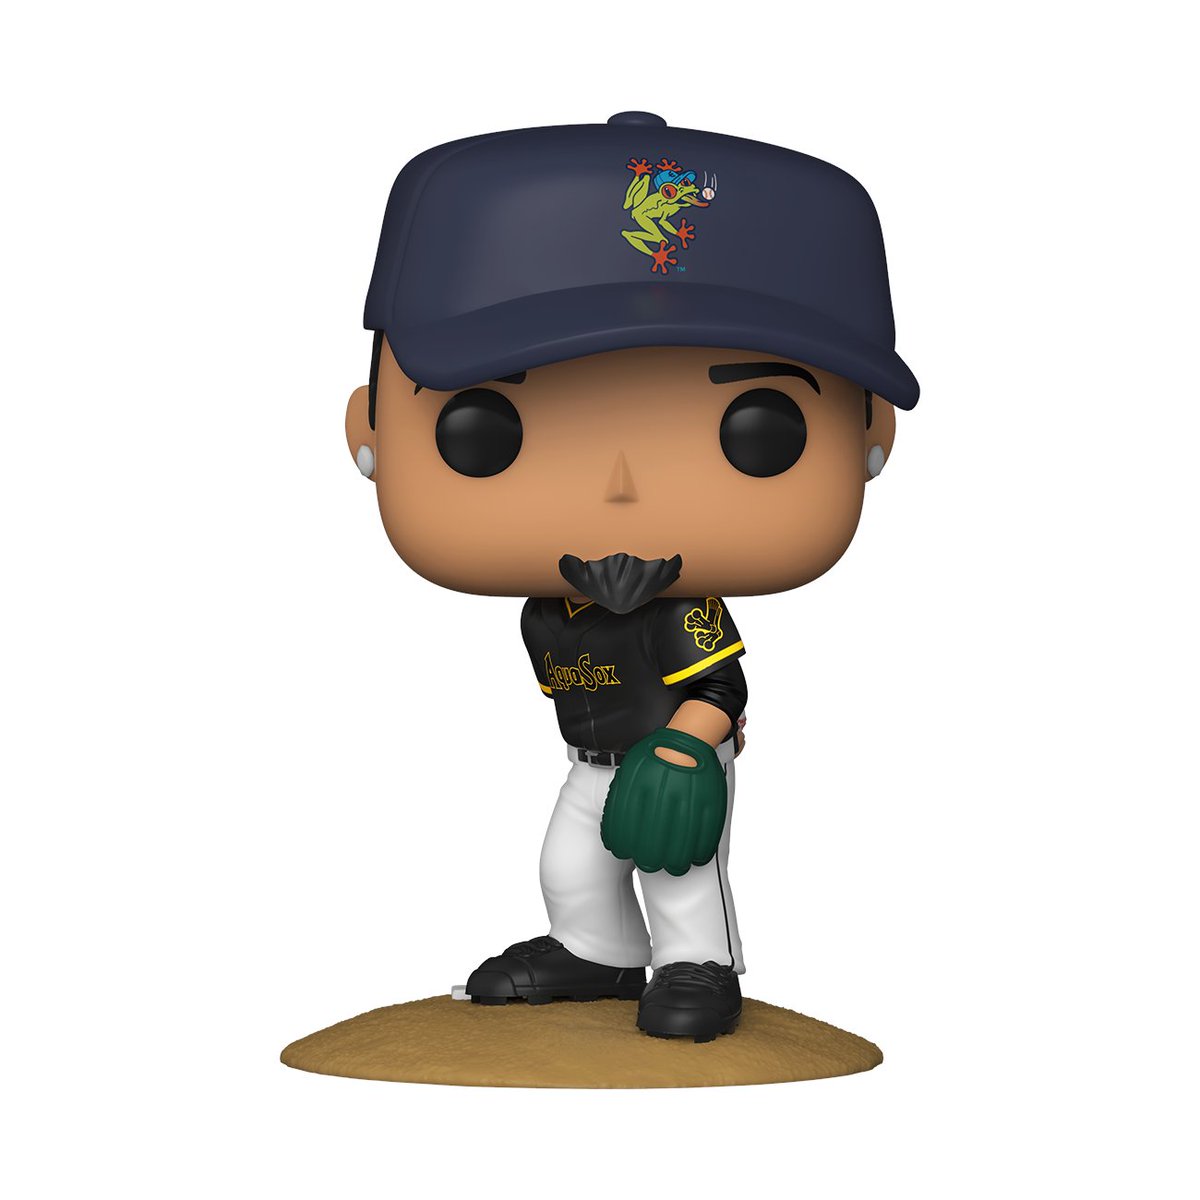 Funko Friday is back at #FunkoField! RT and follow @OriginalFunko for the chance to WIN a Félix Hernández Pop! #Funko #FunkoPop #FelixHernandez #Funkogiveaway @EverettAquaSox